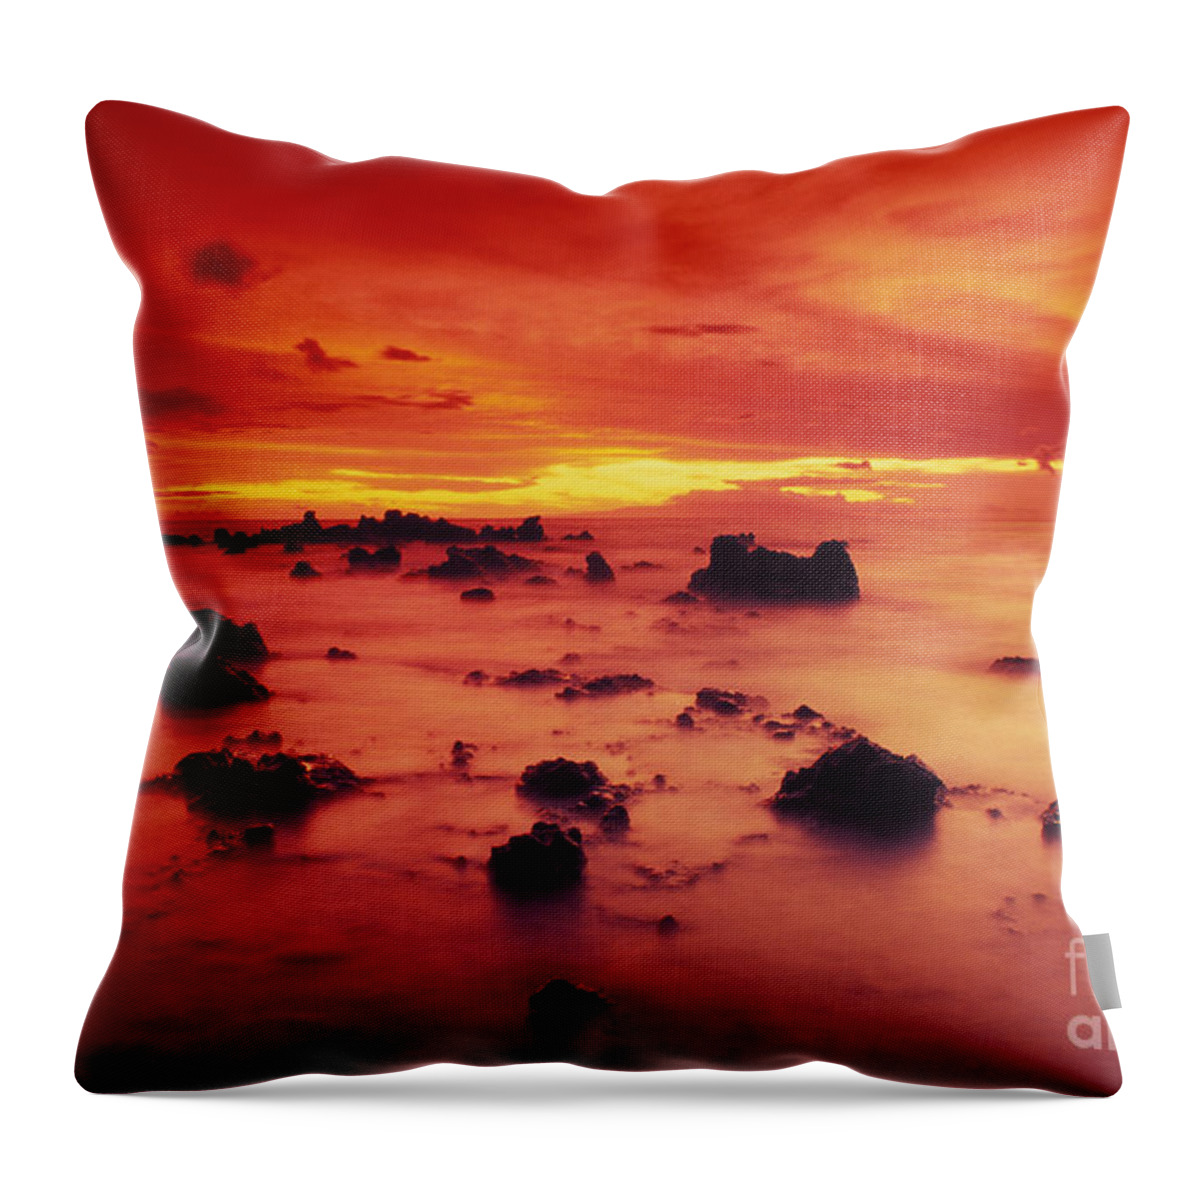 Amaze Throw Pillow featuring the photograph Lava Rock Beach by Dave Fleetham - Printscapes